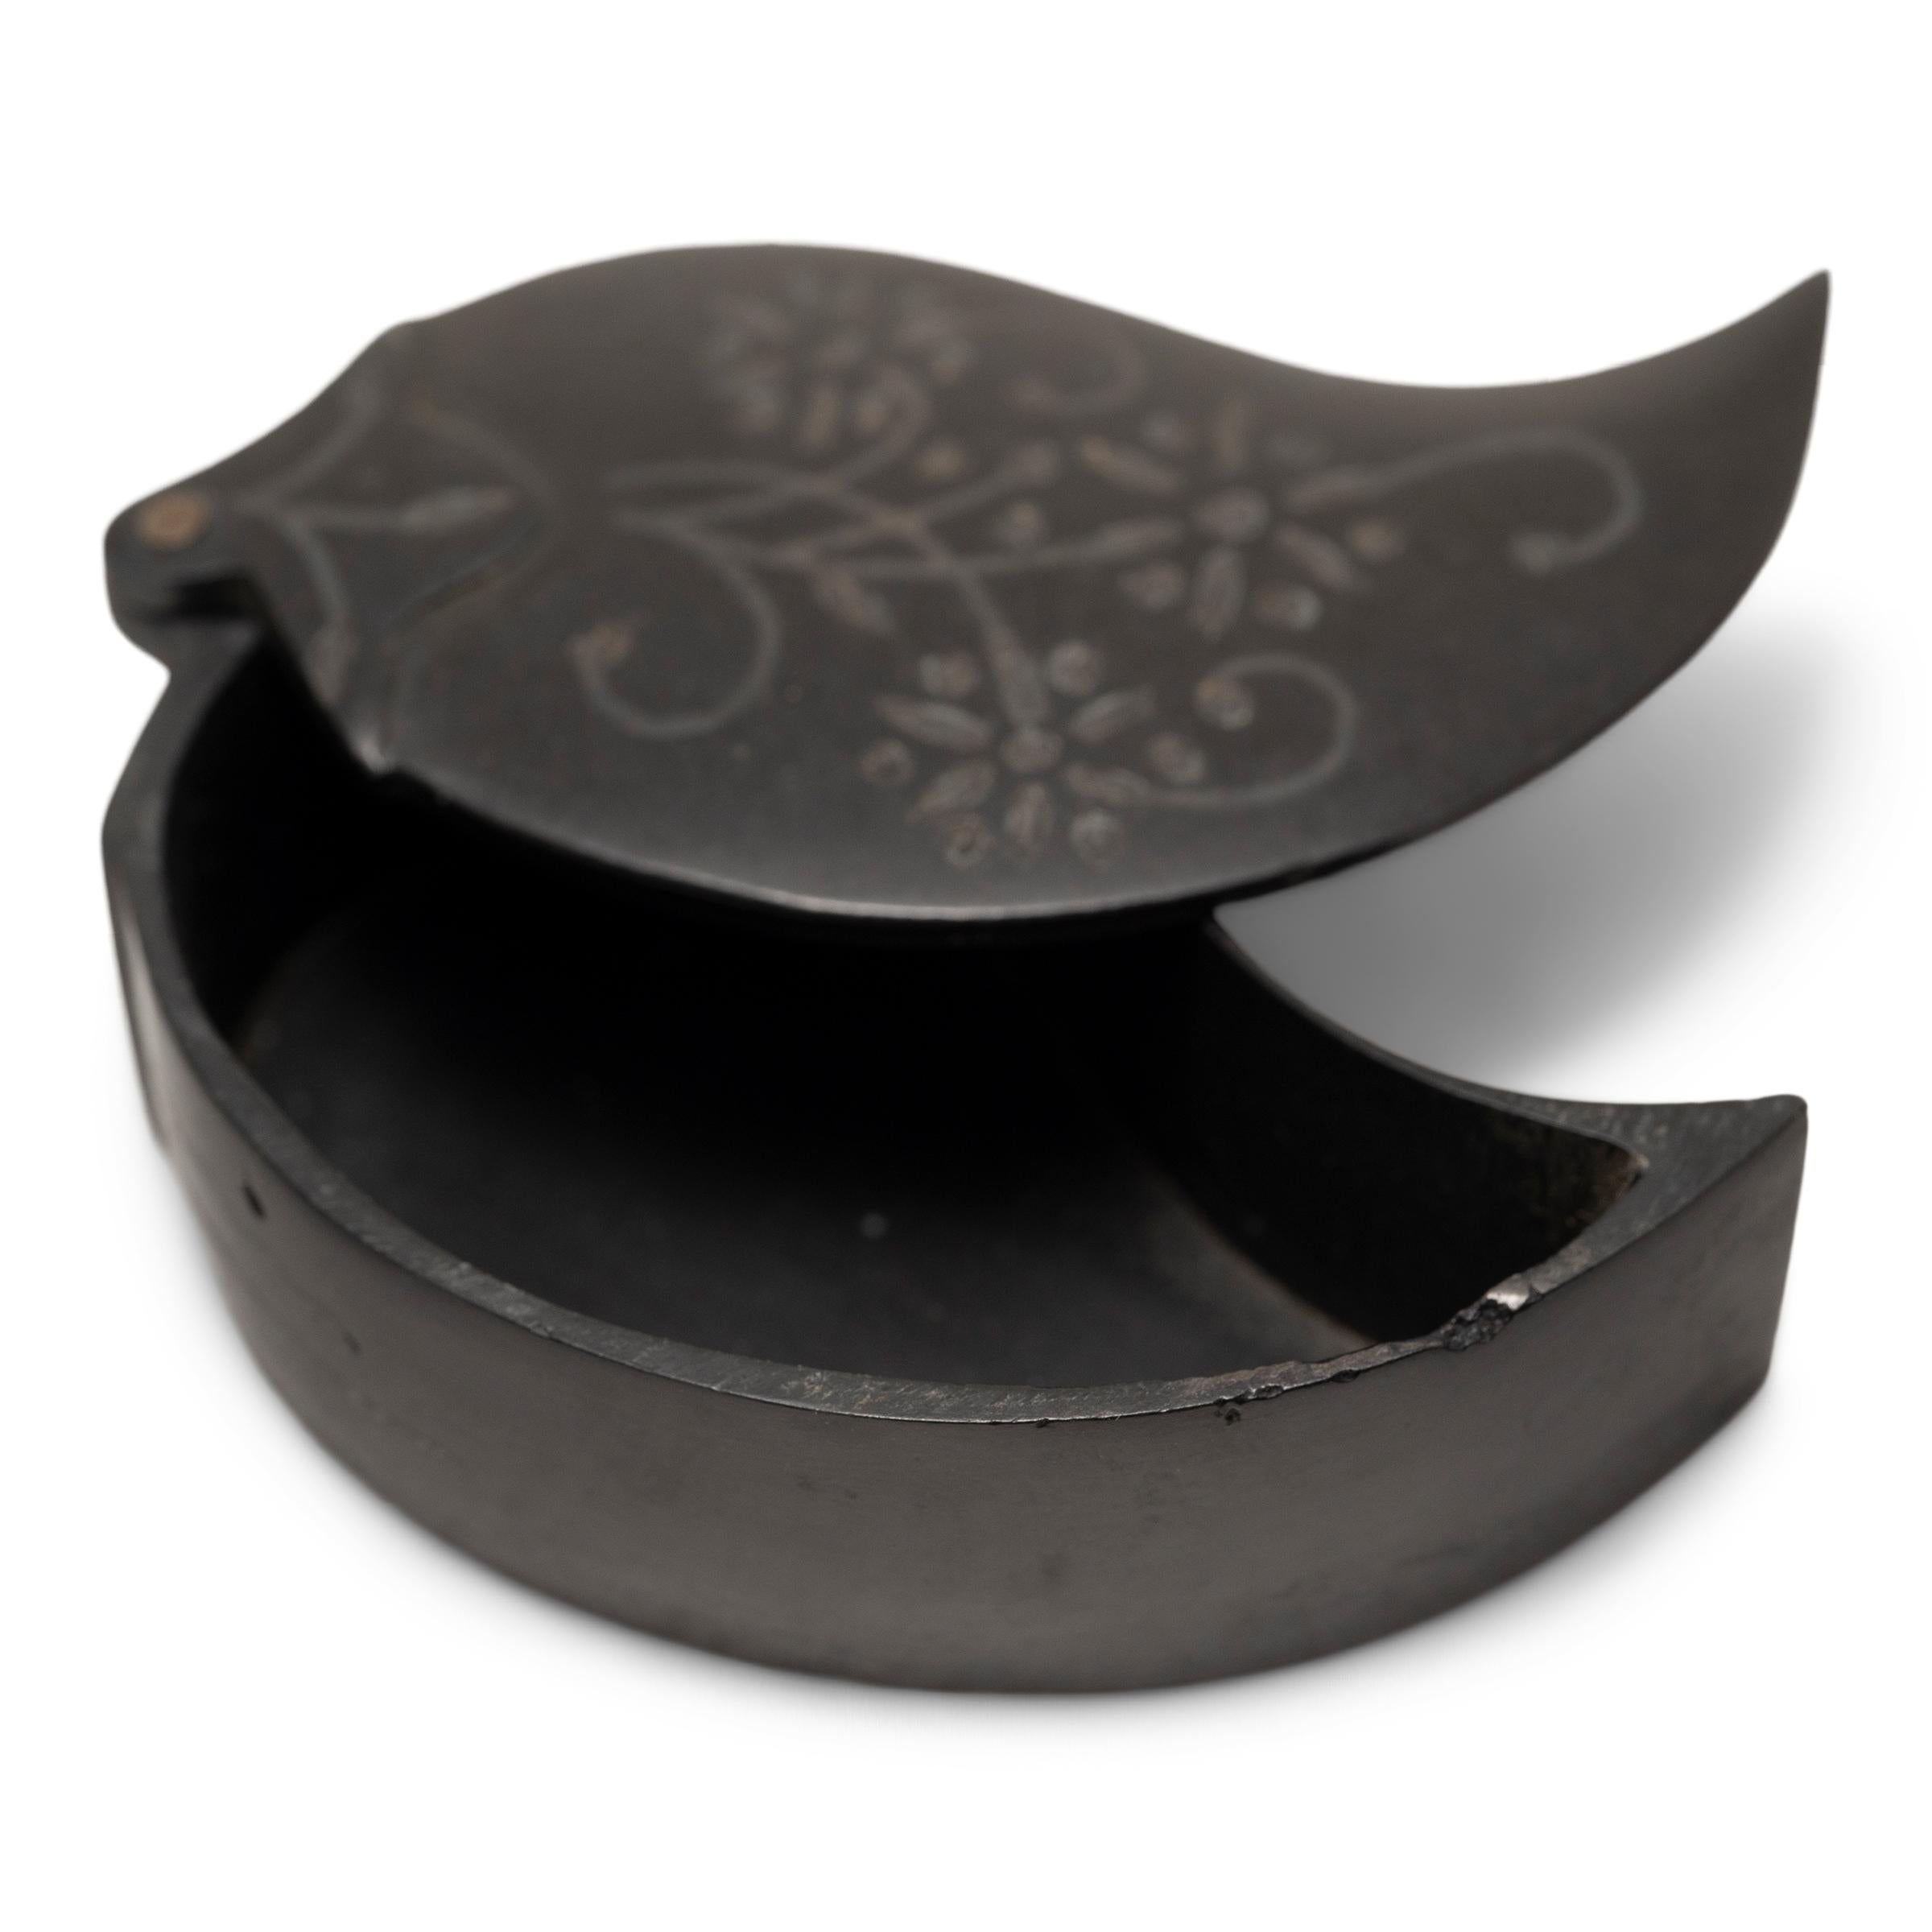 This petite keepsake box with a swivel lid is crafted in the tradition of Indian bidri-ware, with a dark metal body decorated with simple silver inlay. Composed of a zinc and copper alloy known as gun metal, the small box is cast in the form of a